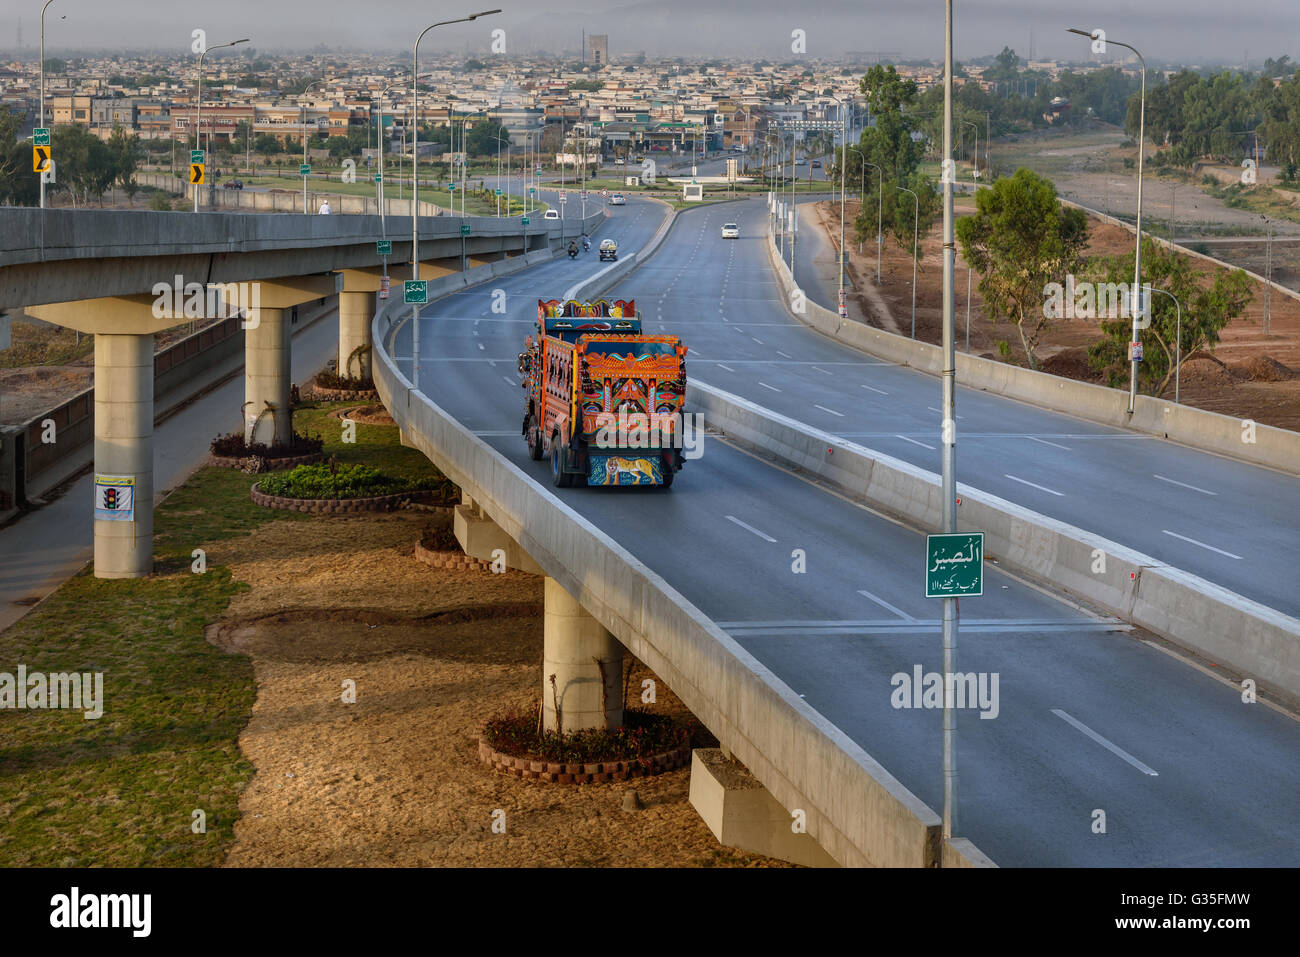 The flyover in Peshawar Pakistan would regulate traffic flow on Pak-Afghan highway. Stock Photo